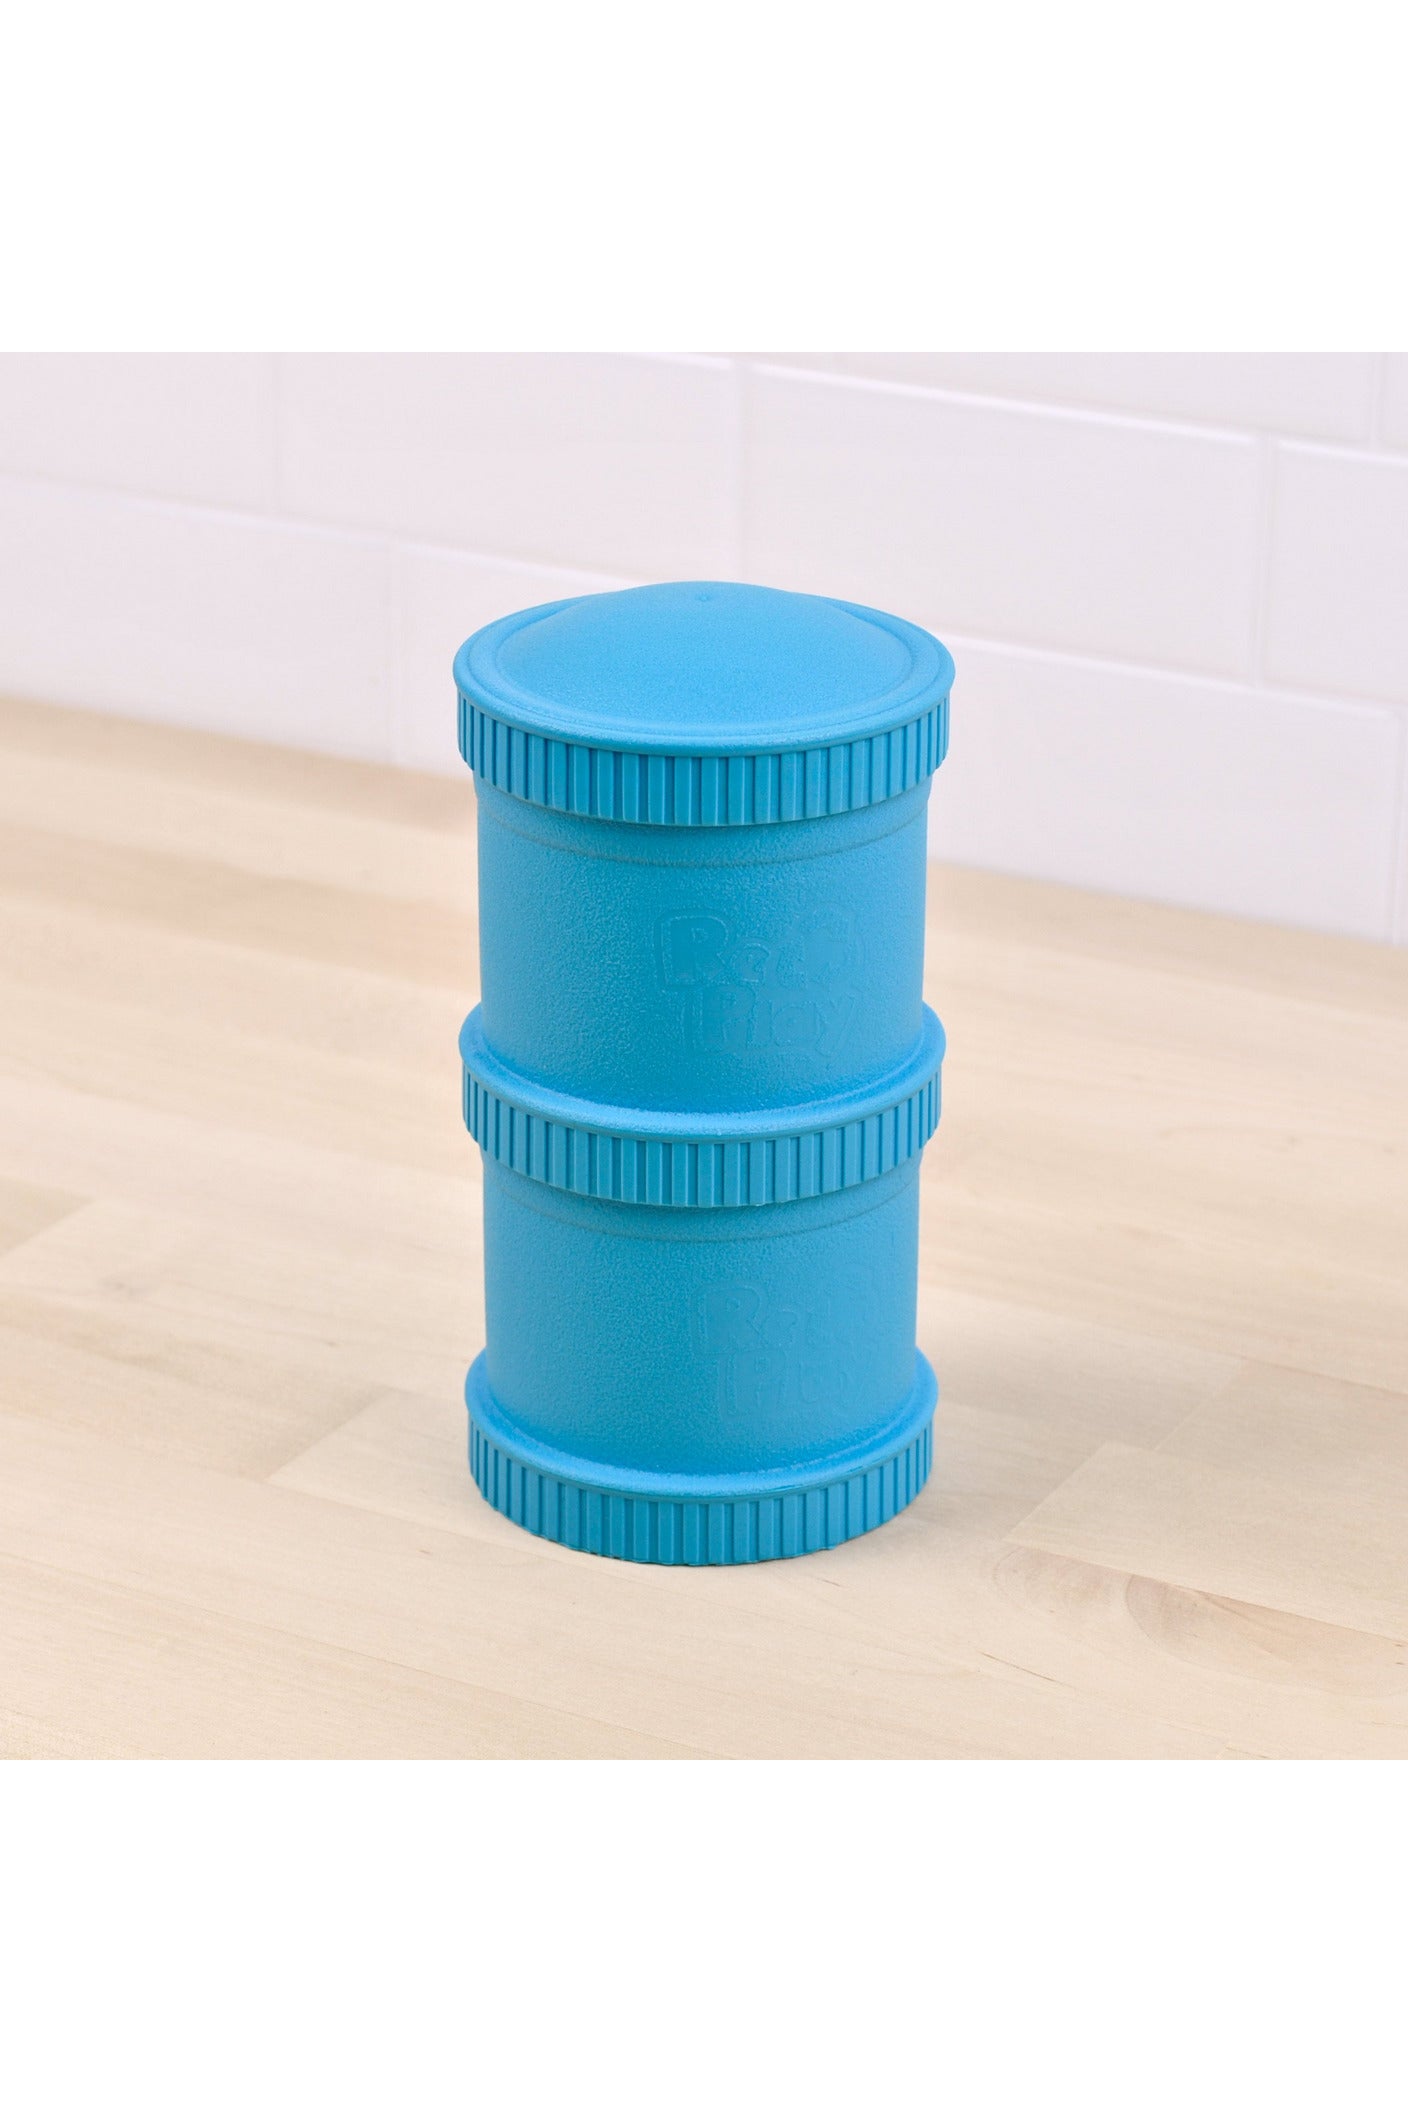 Re-Play Snack Stack (2 Pods and 1 Lid NO Retail Packaging) - Sky Blue